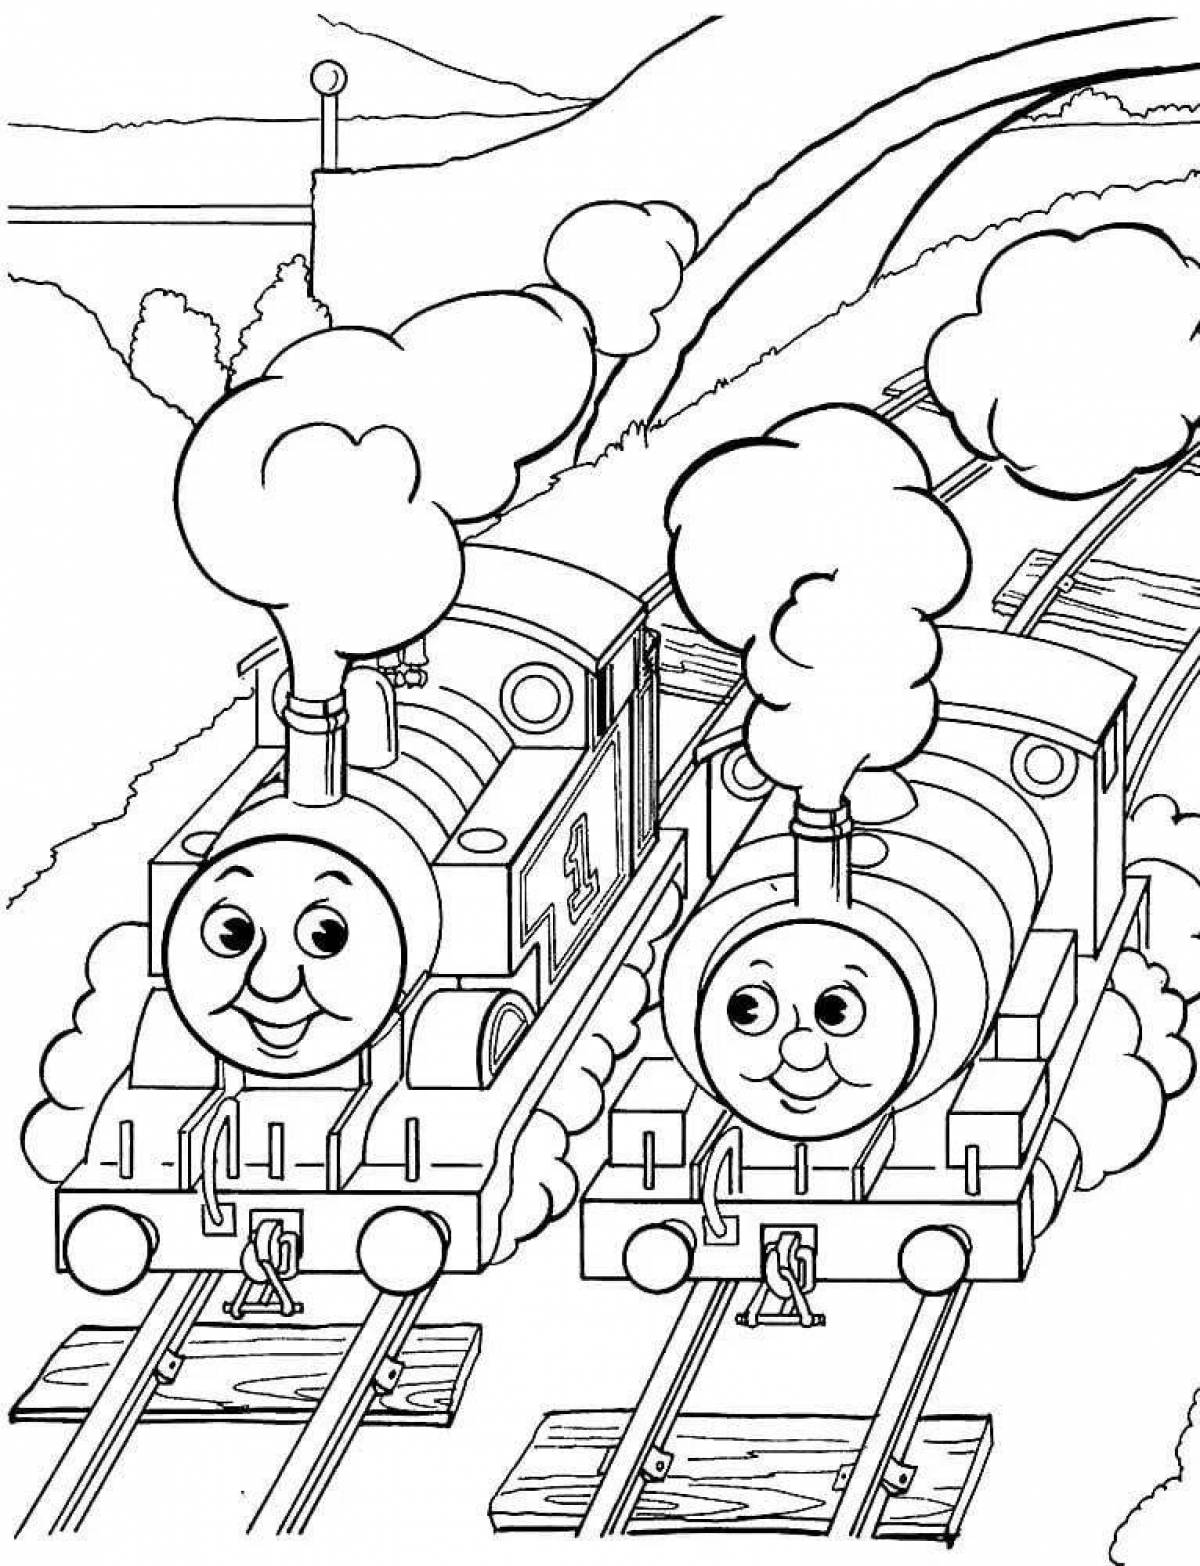 Creative games thomas and friends